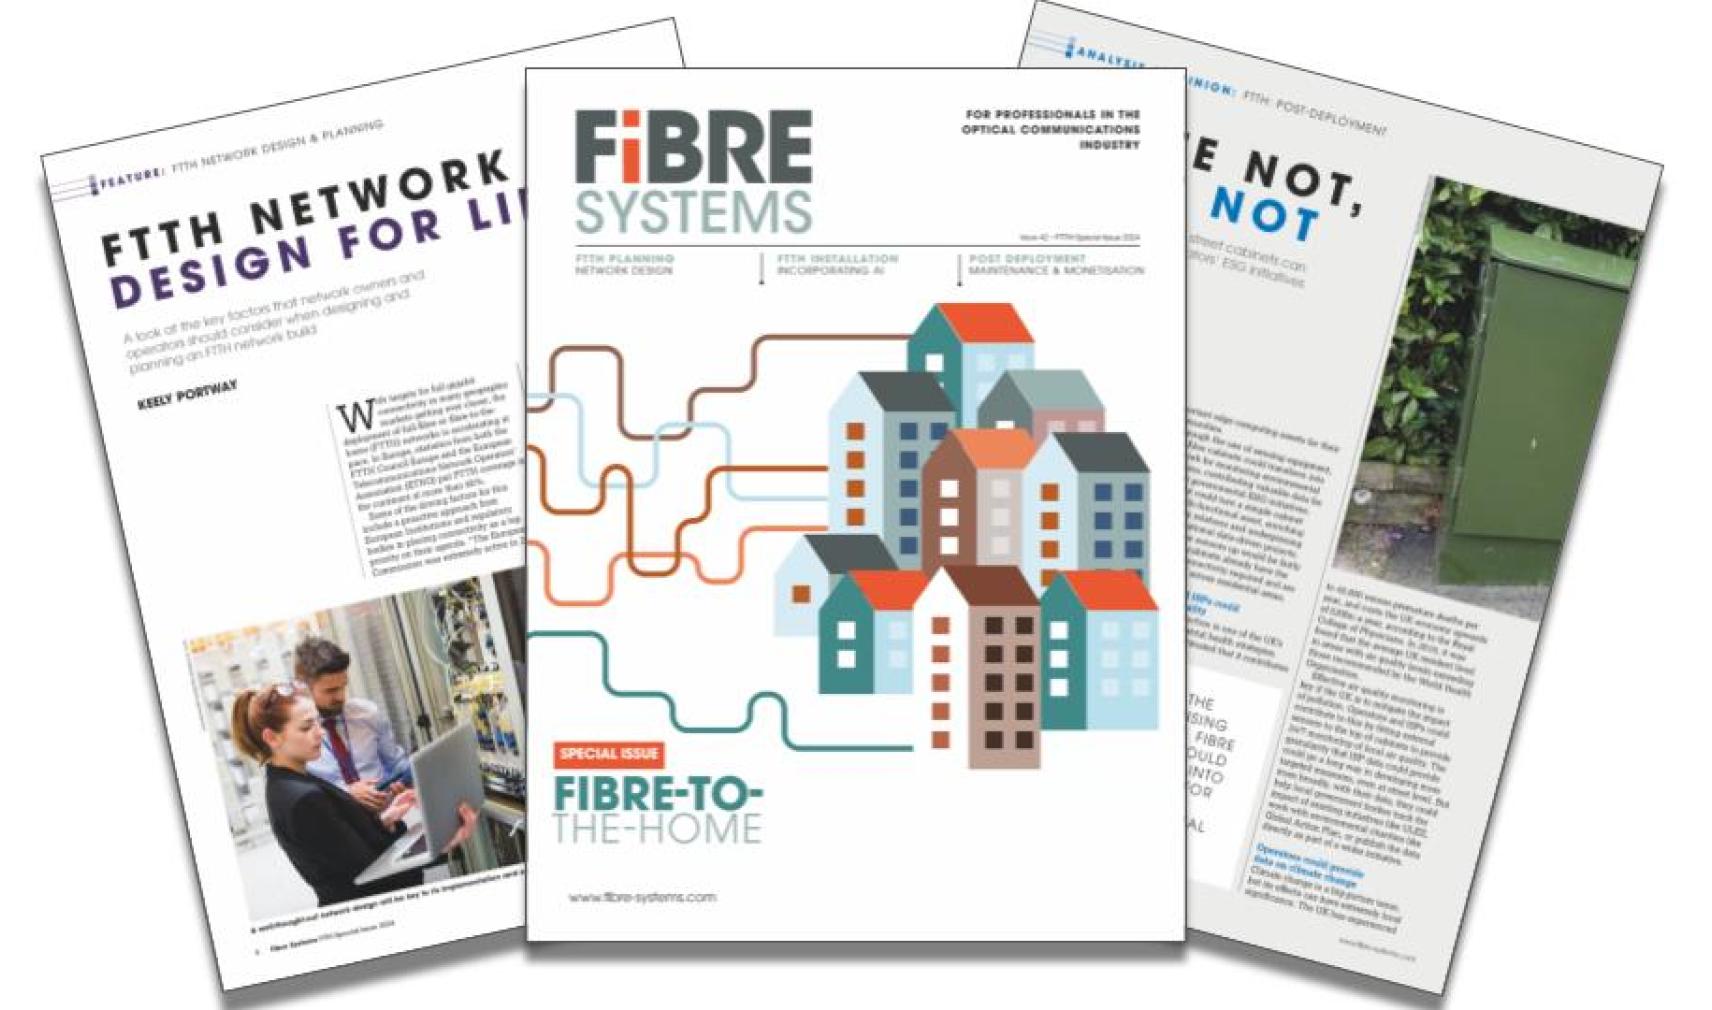 The FTTH special issue is out now